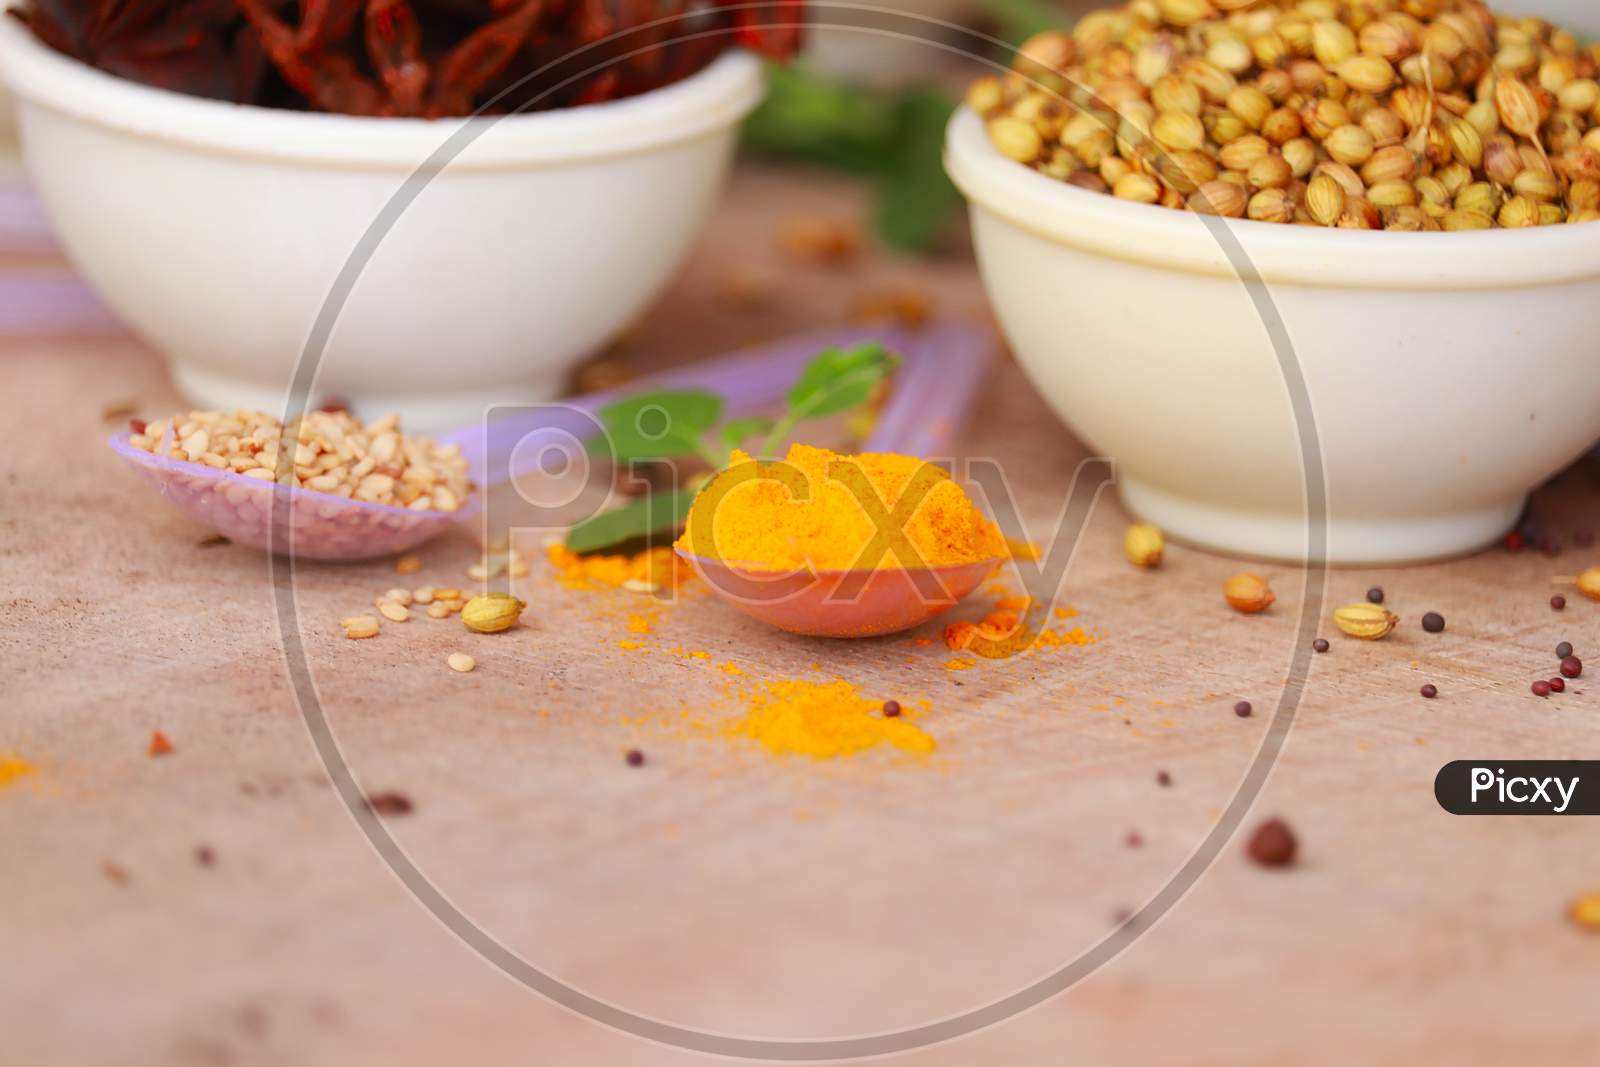 Spices And Herbs In White Bowls,Indian Exotic Gourmet Food Ingredients: Incl Turmeric,Spice For The Indian Curry,Garam Masala,Tandoori Masala,